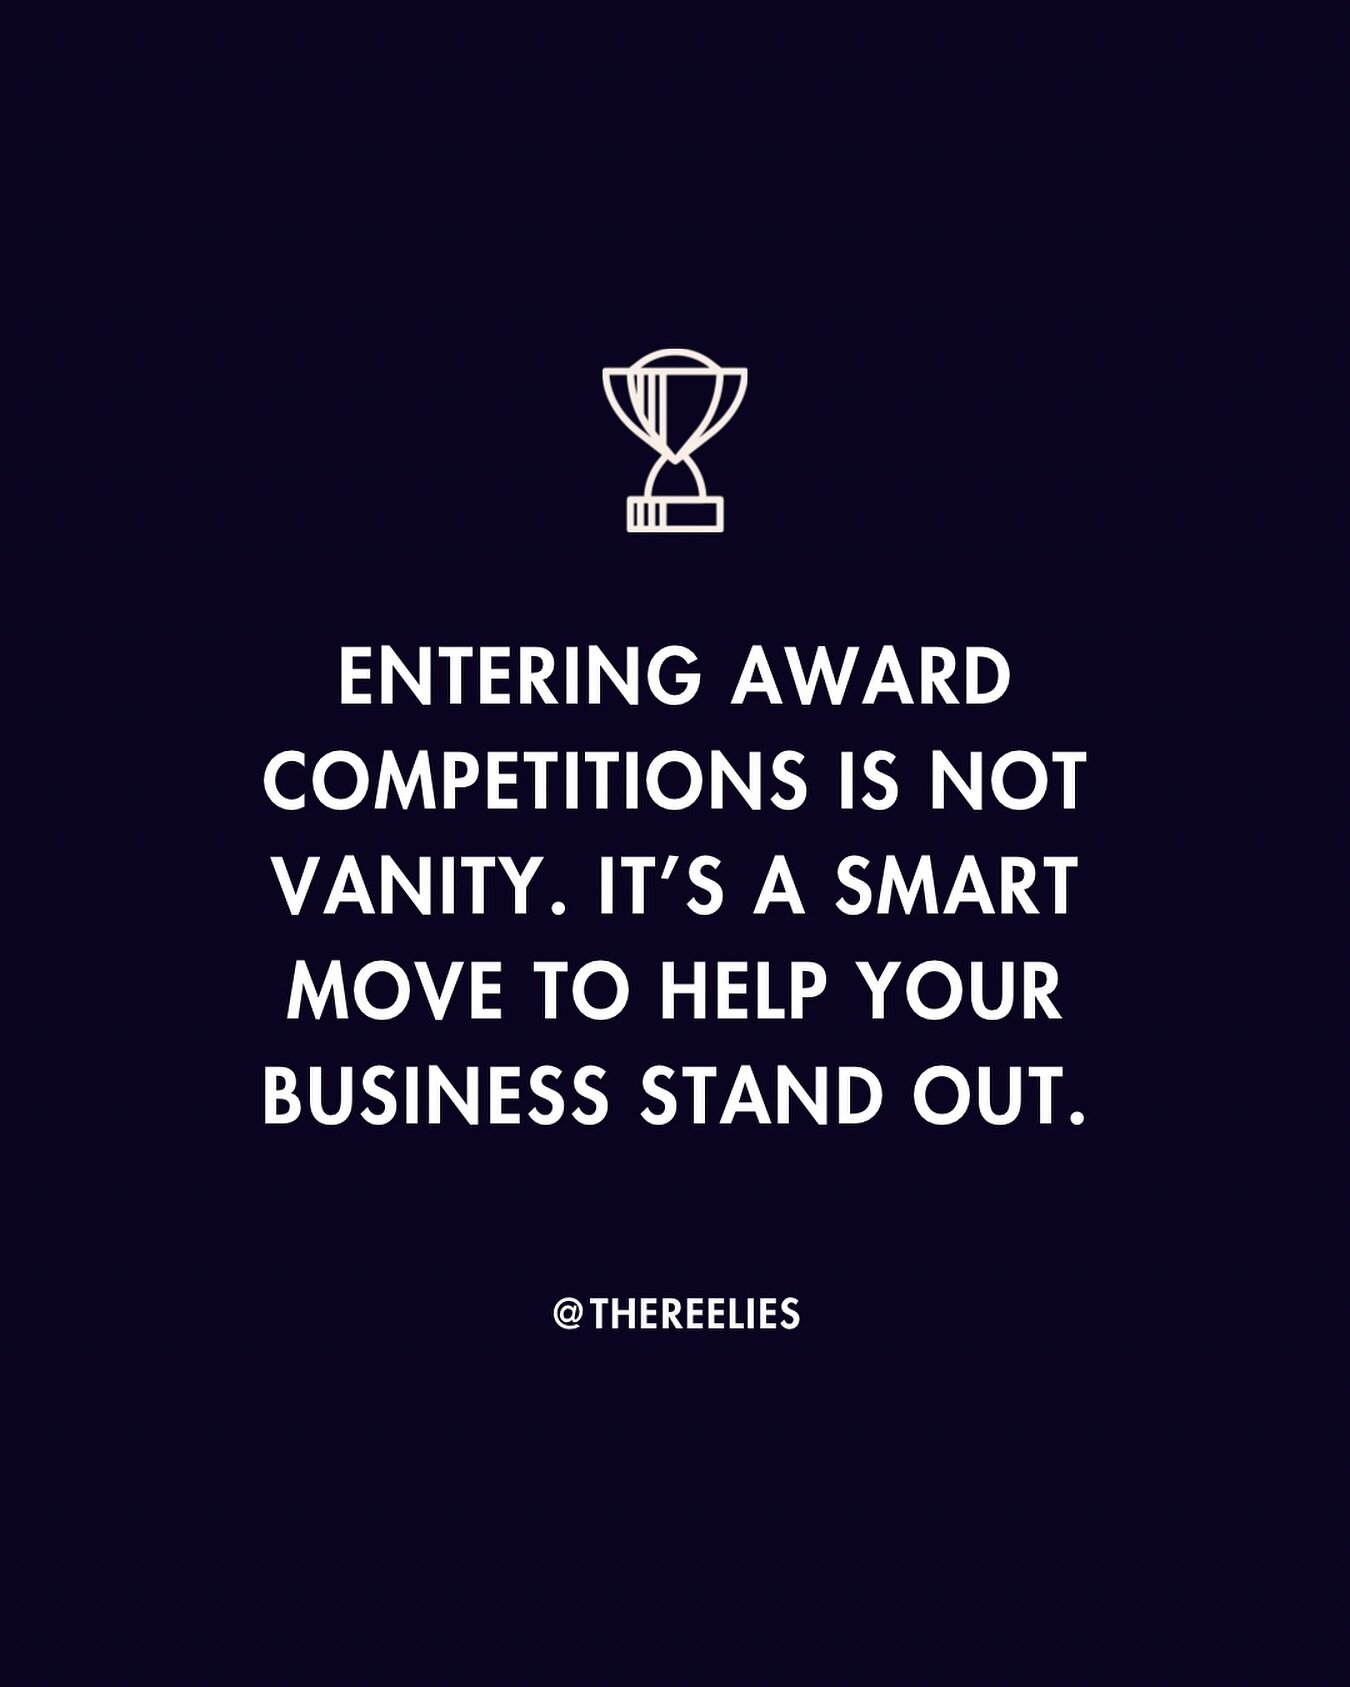 Entering award competitions is not vanity, it&rsquo;s a smart business move. 🏆

In industries that are so competing and saturated, awards are one more thing that can help you stand out. 
Plus dressing up and attending the award shows are a great mor